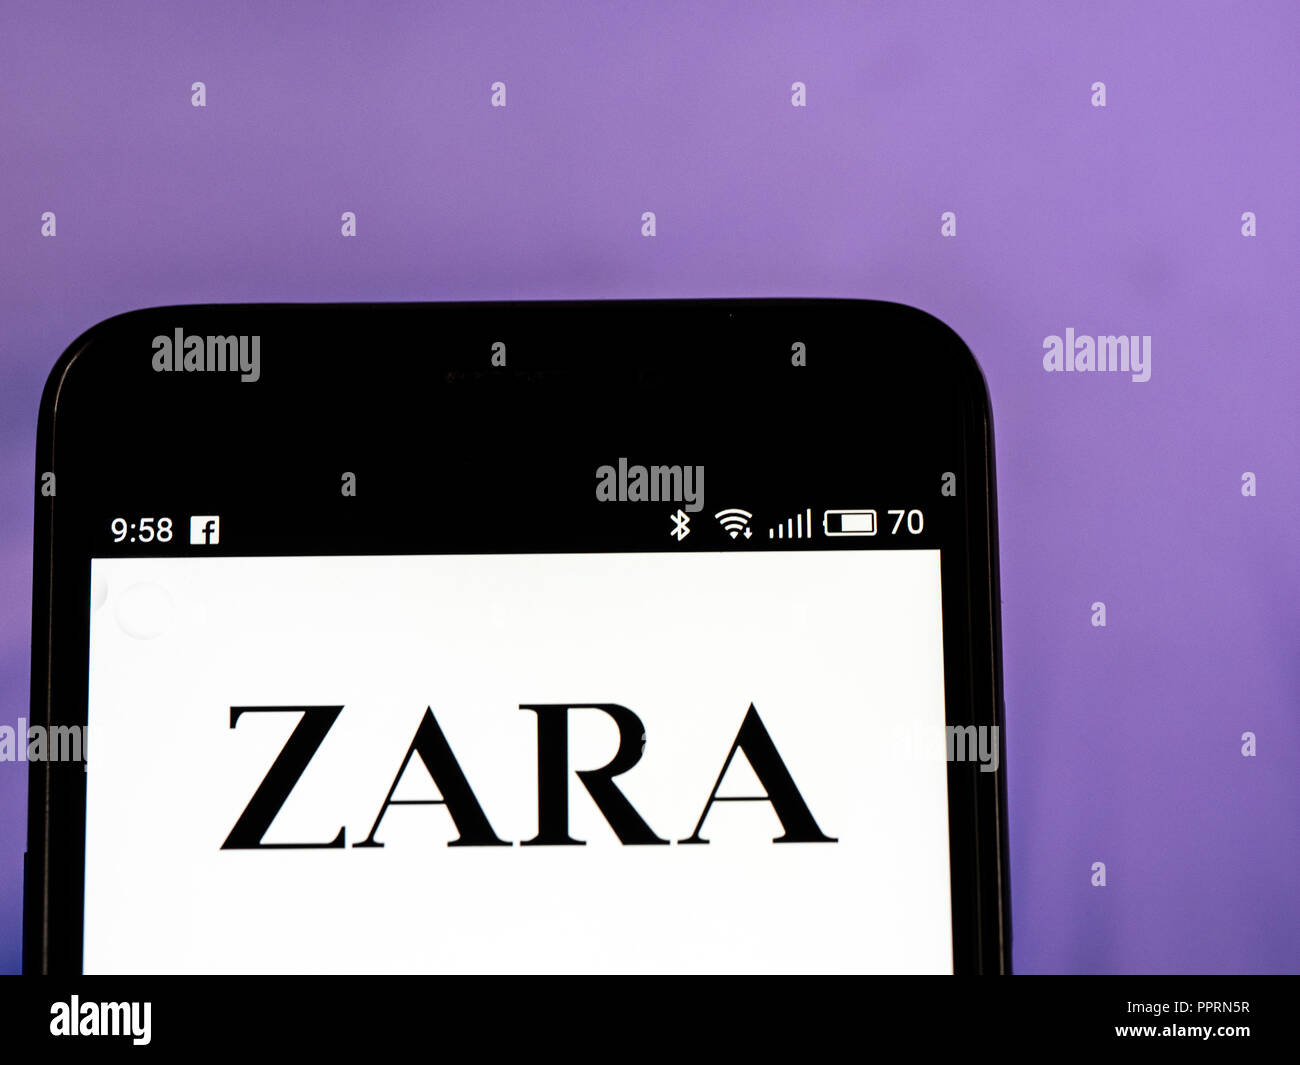 Page 3 - Zara Logo High Resolution Stock Photography and Images - Alamy